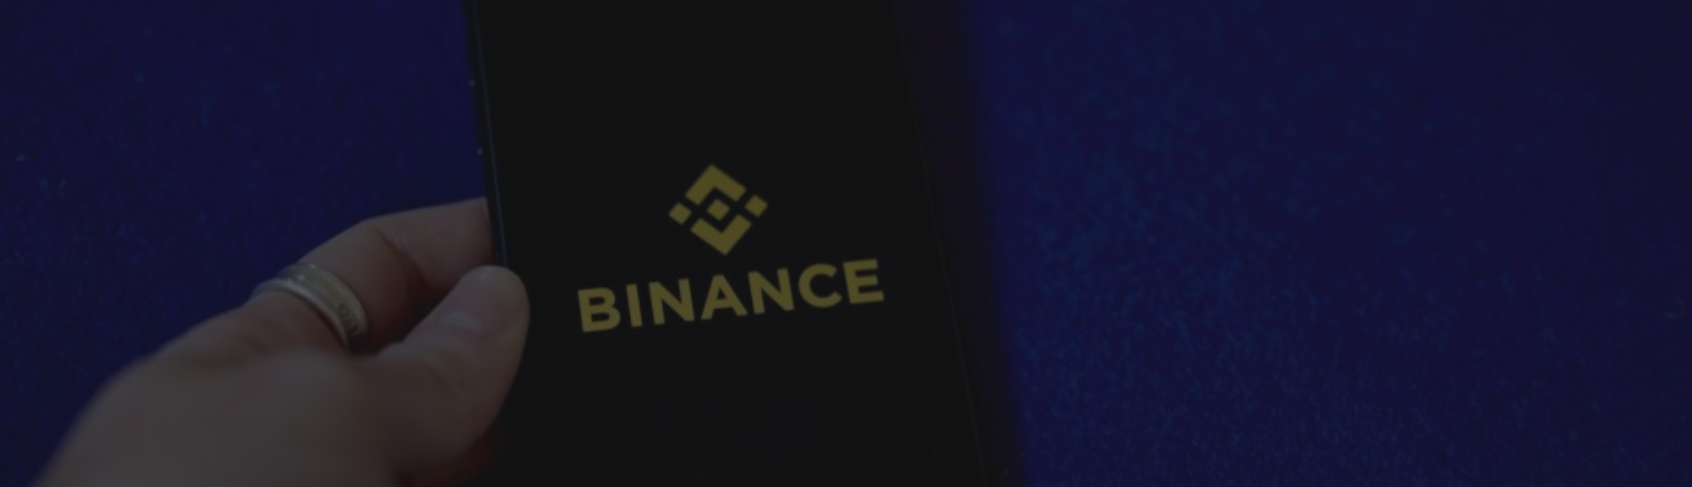 Mikhail Reider-Gordon Quoted in Bloomberg Law Article “Binance Monitor Must Build An ‘Army’ For Unique Compliance Role”